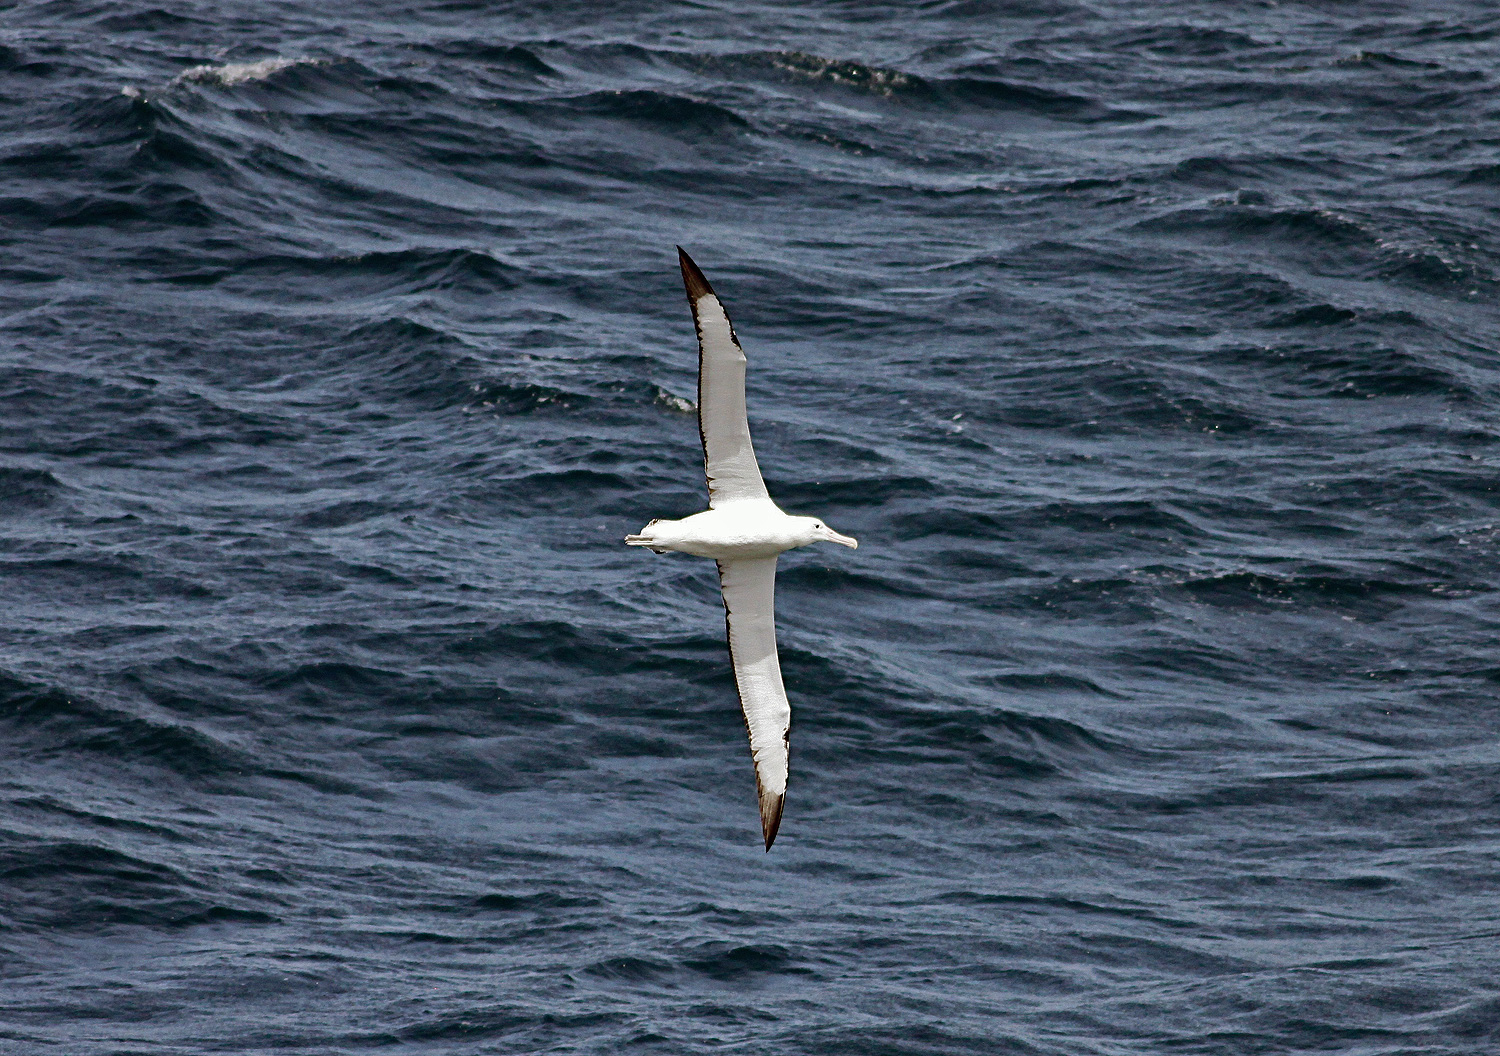 Wandering Albatross - Diomedea exulans - The Bird Which Made the Wind to Blow